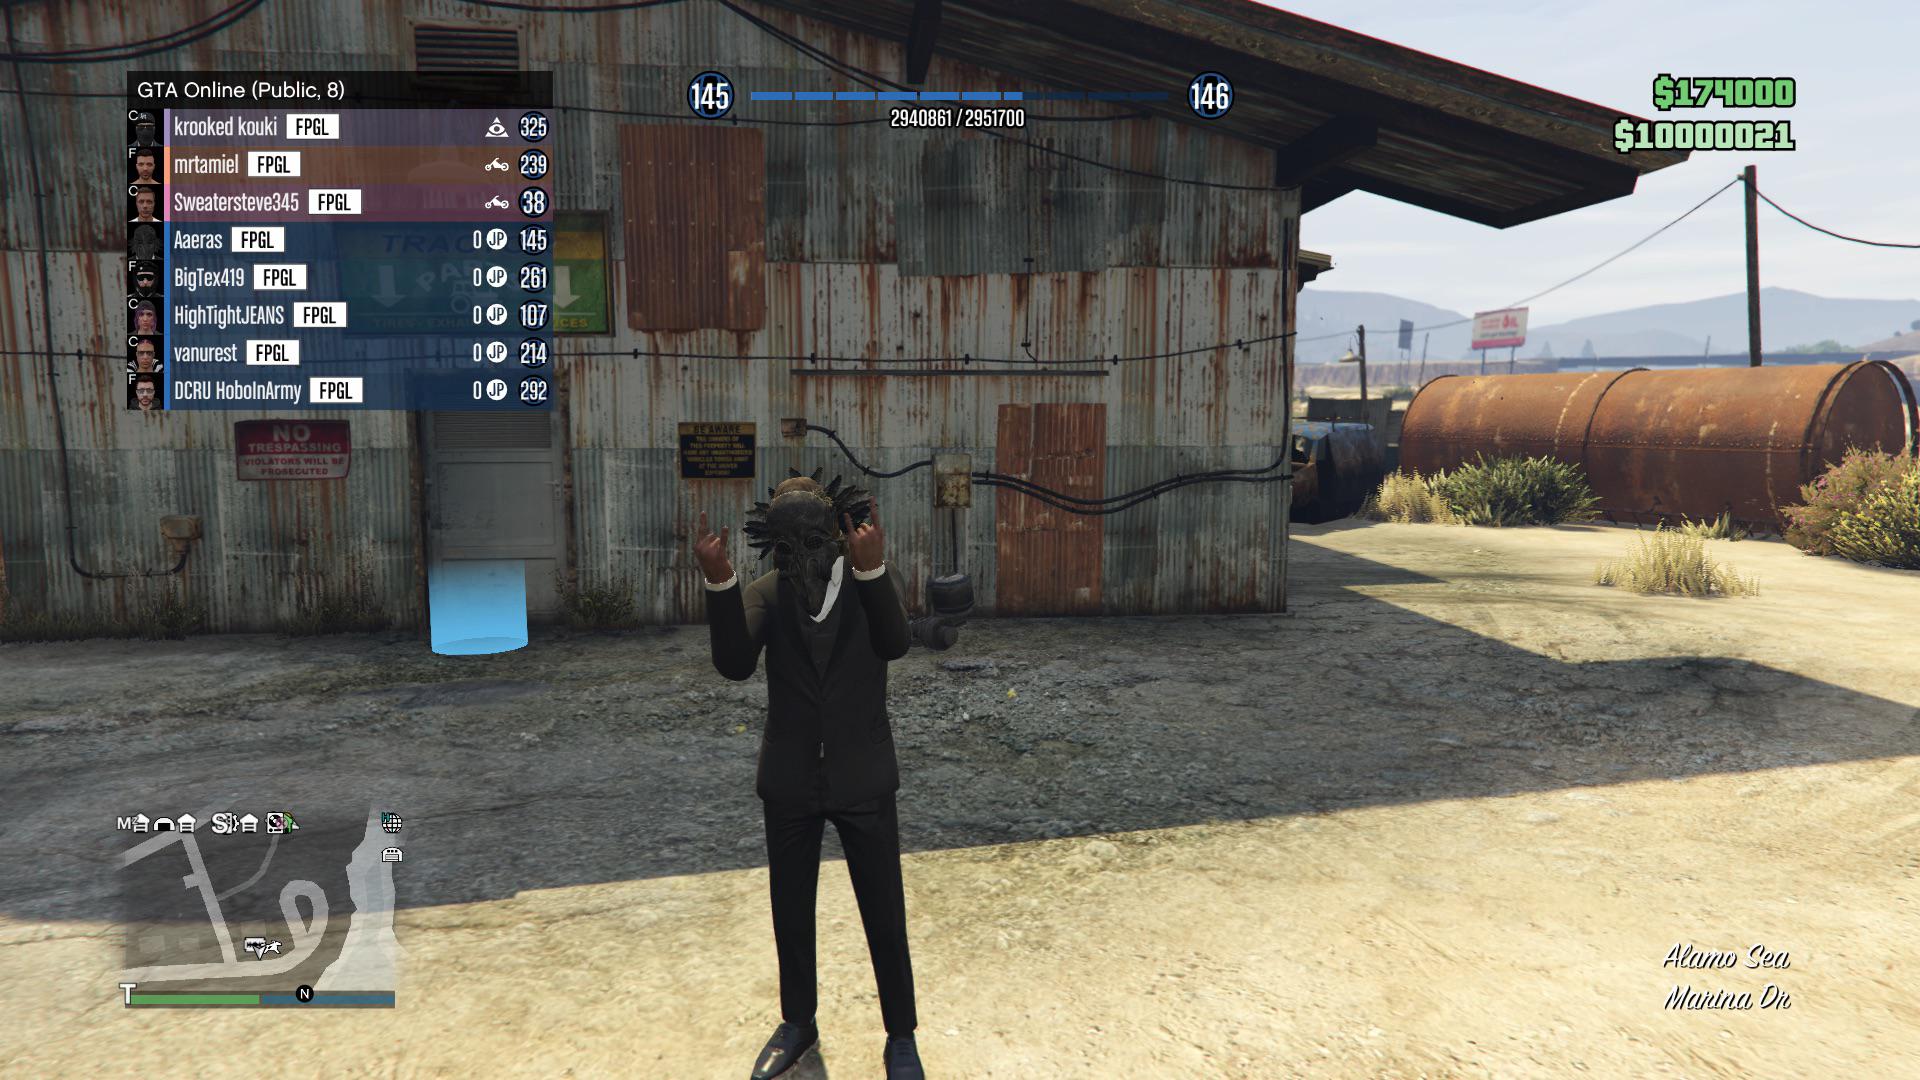 I boost GTA V accounts with a non-bannable method I've done it before, I've been using this method for 2 years